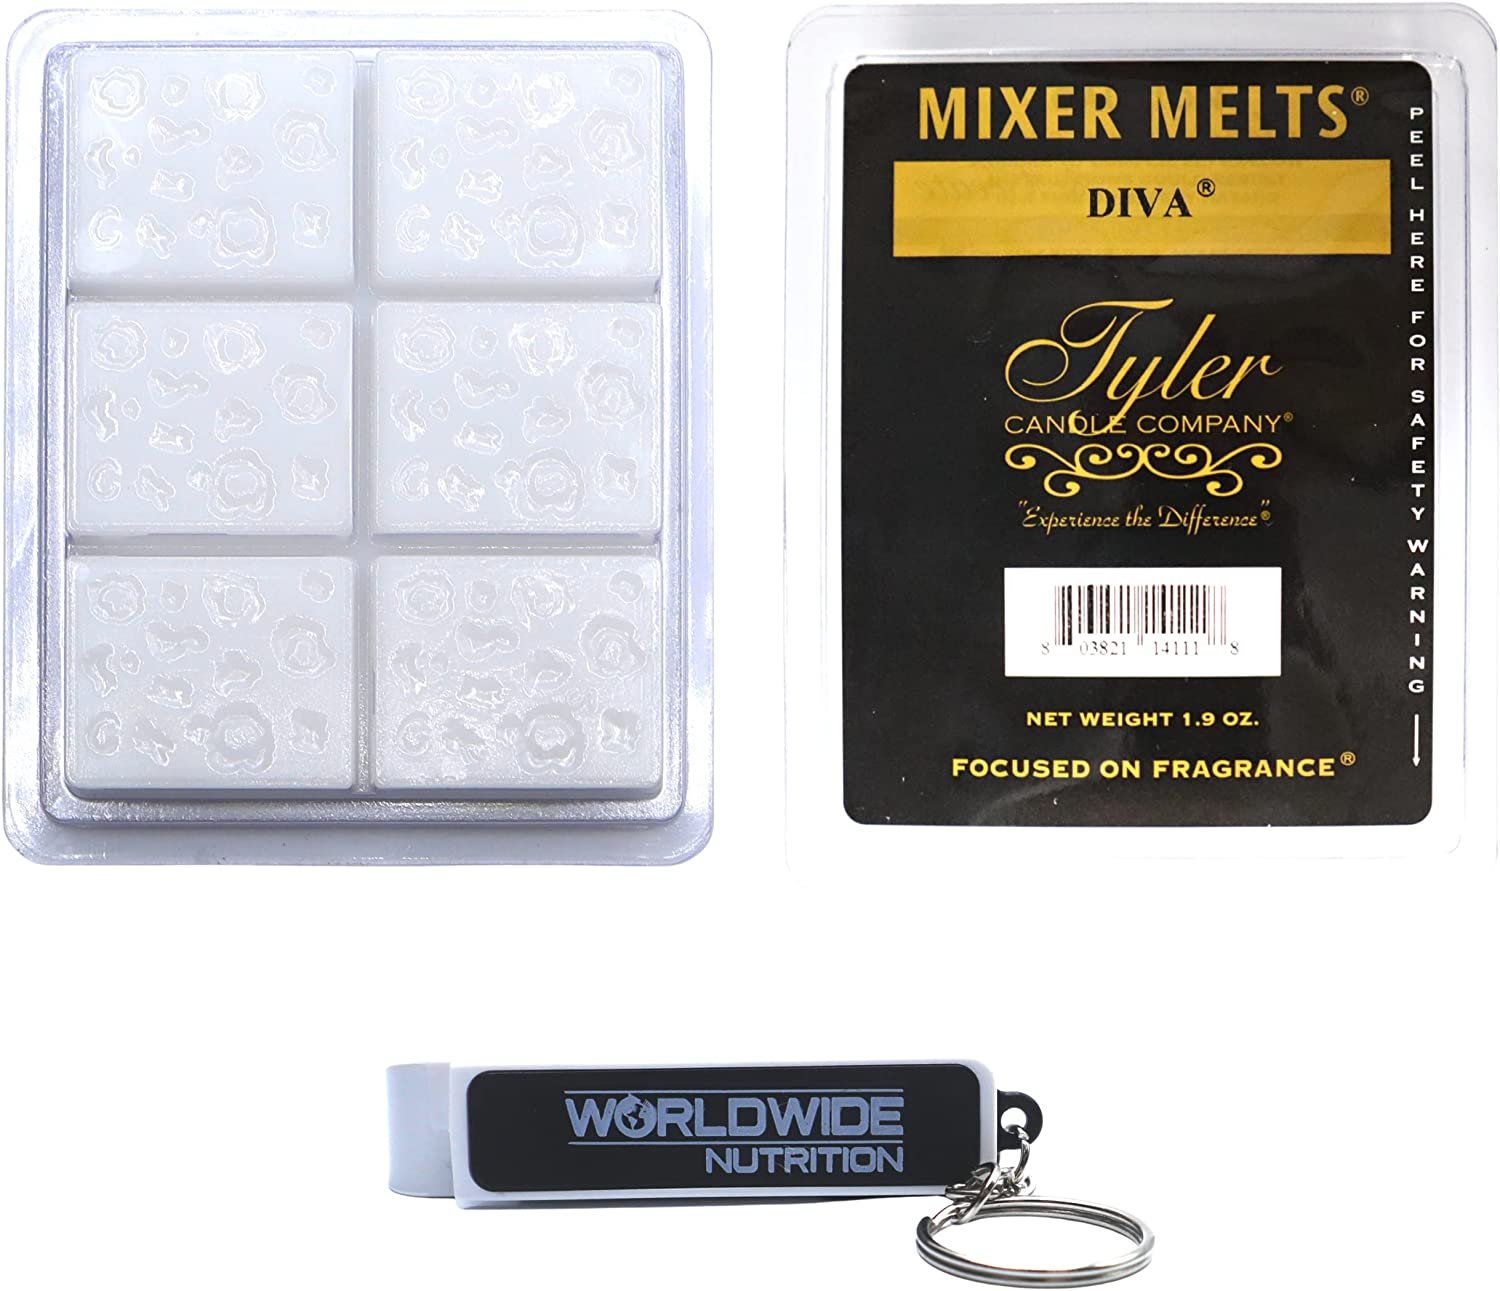 Tyler Candle Company Diva Scent Wax Melts - Scented Mixer Melts with E